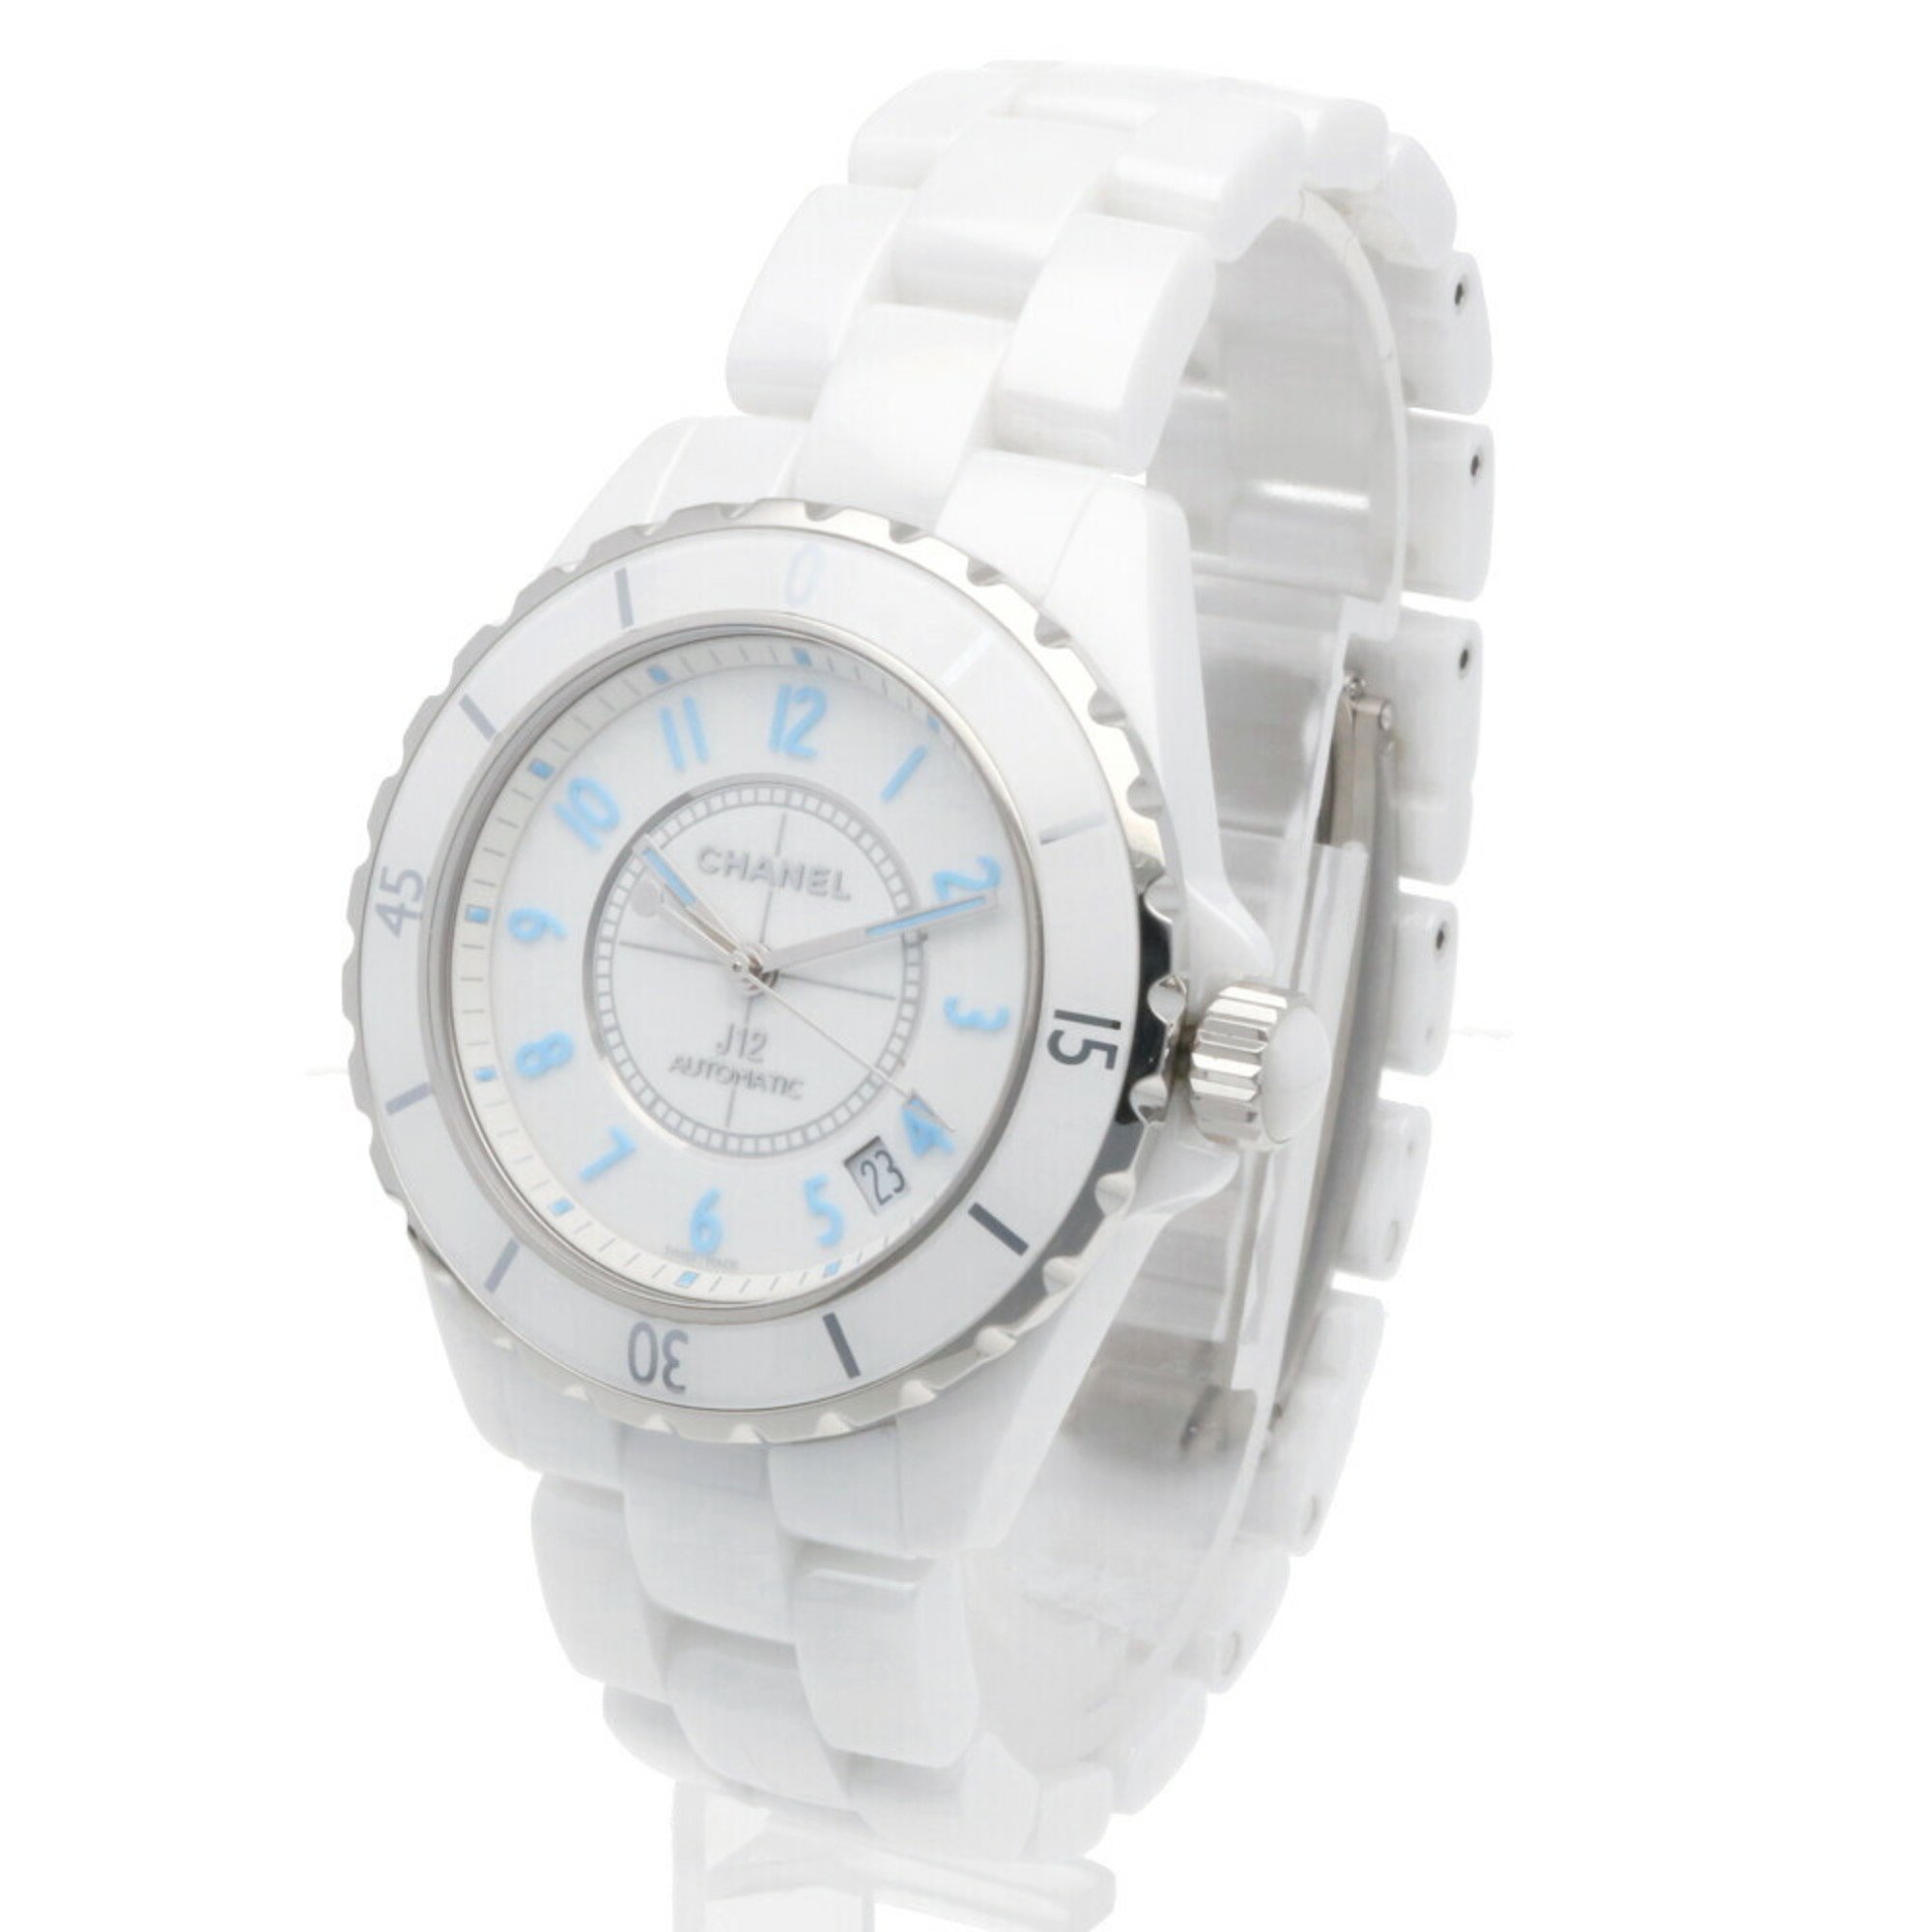 Chanel J12 Blue Light Watch Ceramic H3827 Automatic Men's CHANEL World Limited Edition 2000